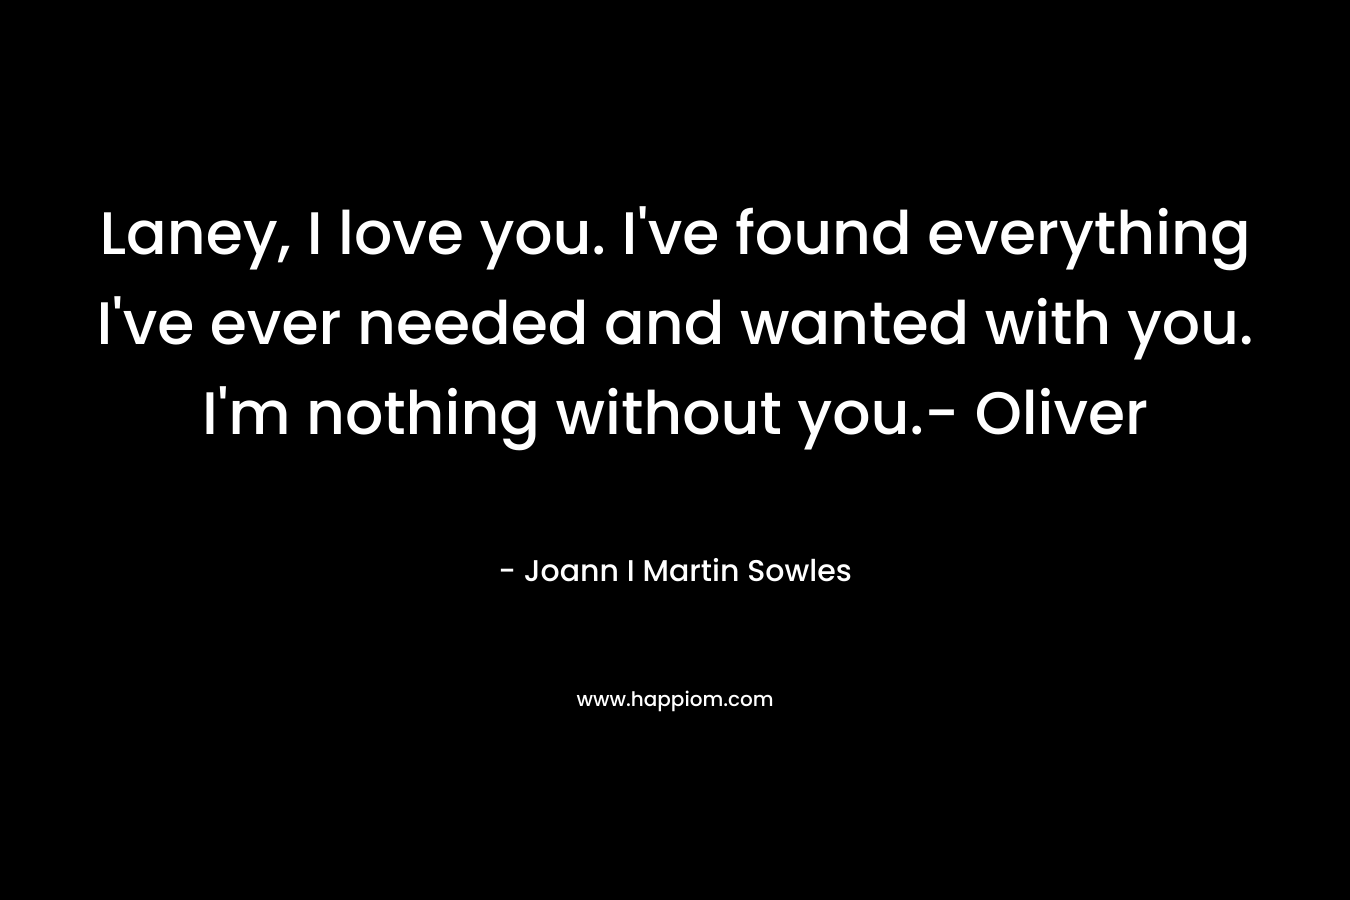 Laney, I love you. I’ve found everything I’ve ever needed and wanted with you. I’m nothing without you.- Oliver – Joann I Martin Sowles